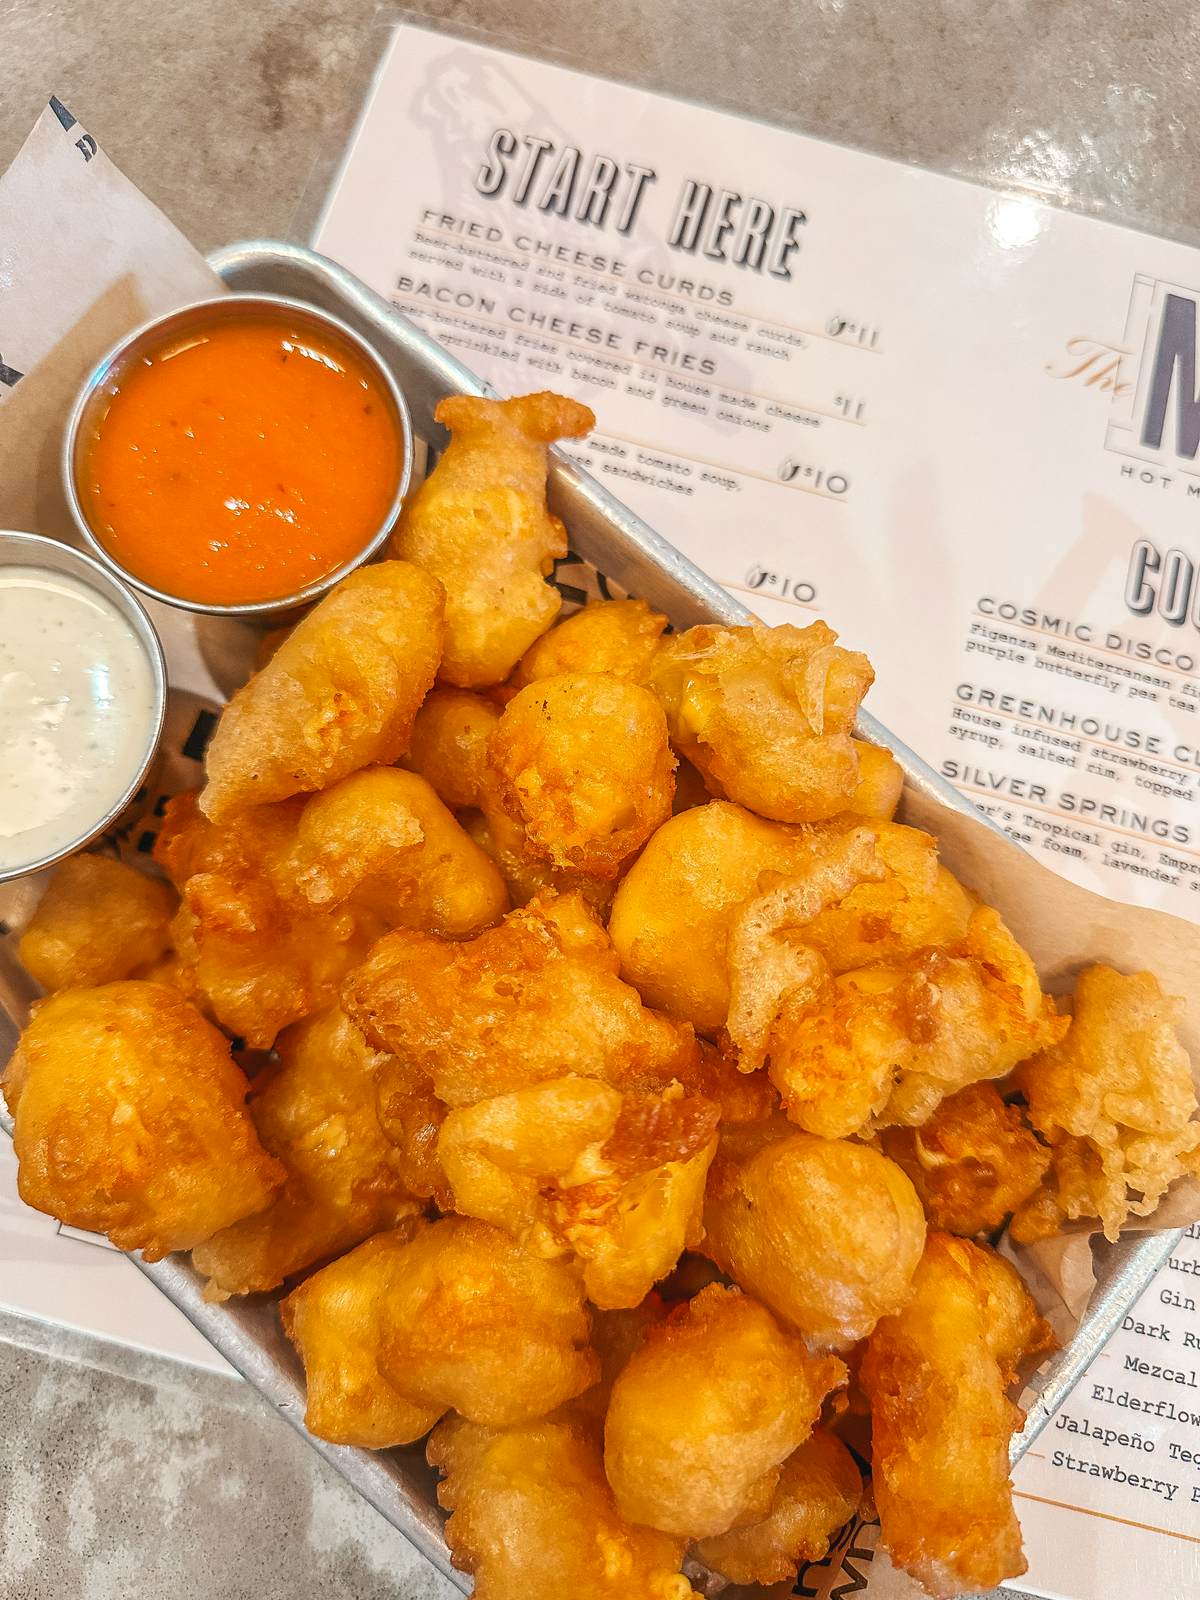 Cheese curds from The Mule in Oklahoma City